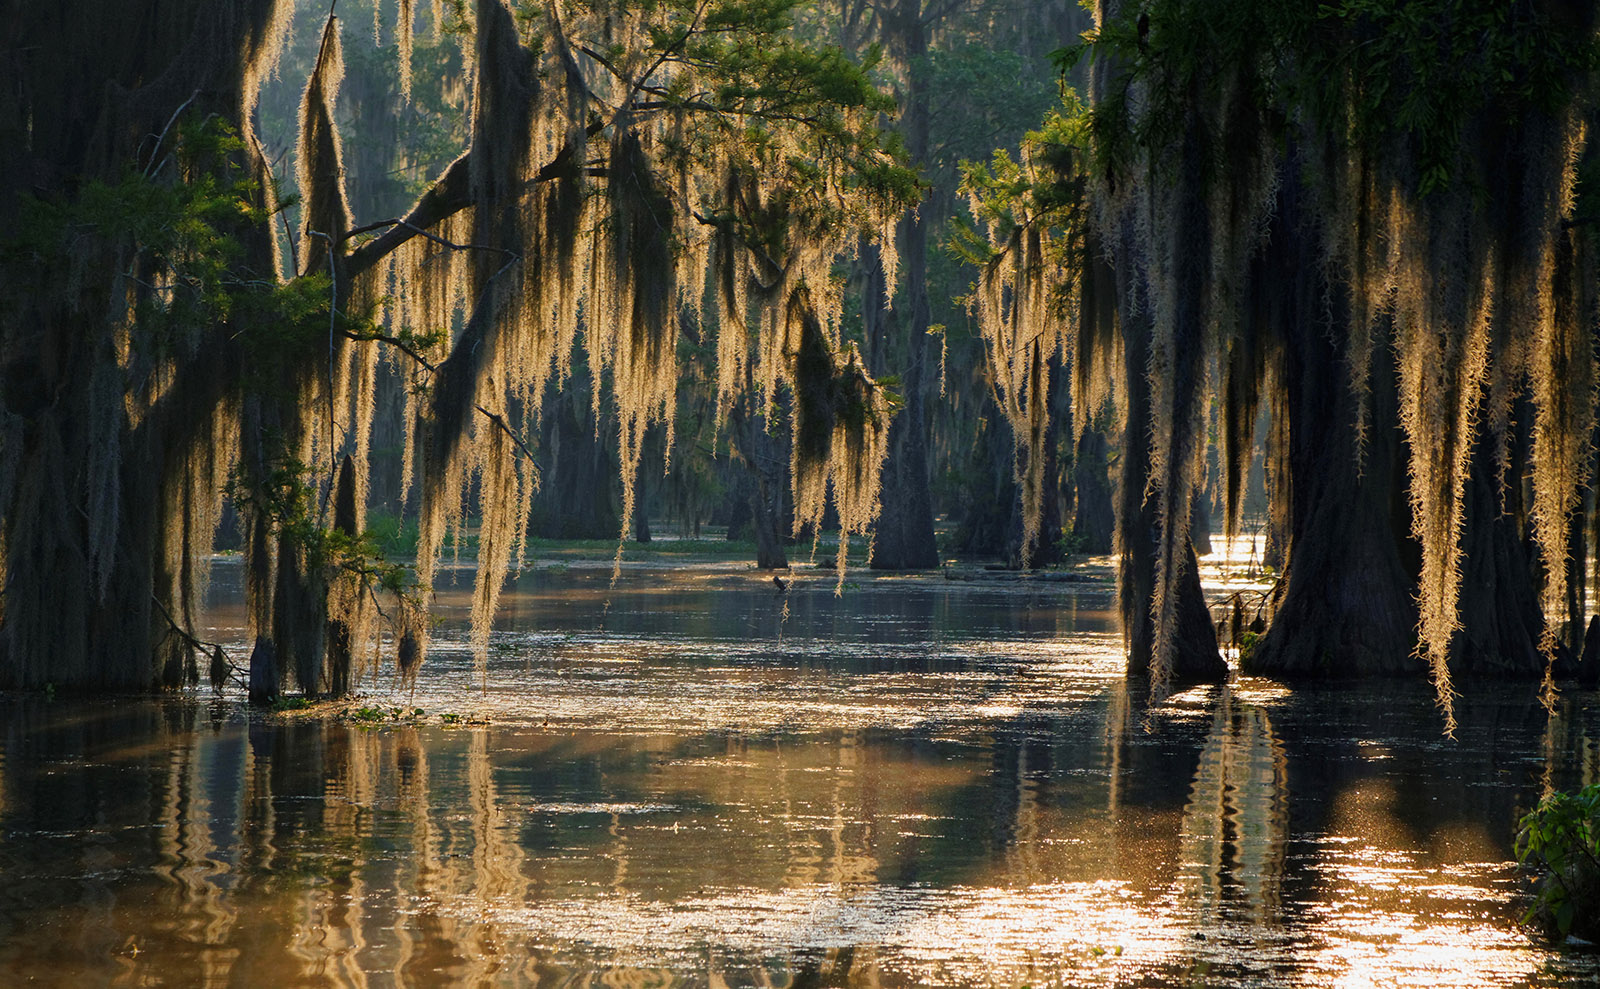 brown trees drooping over the waters of the bayou